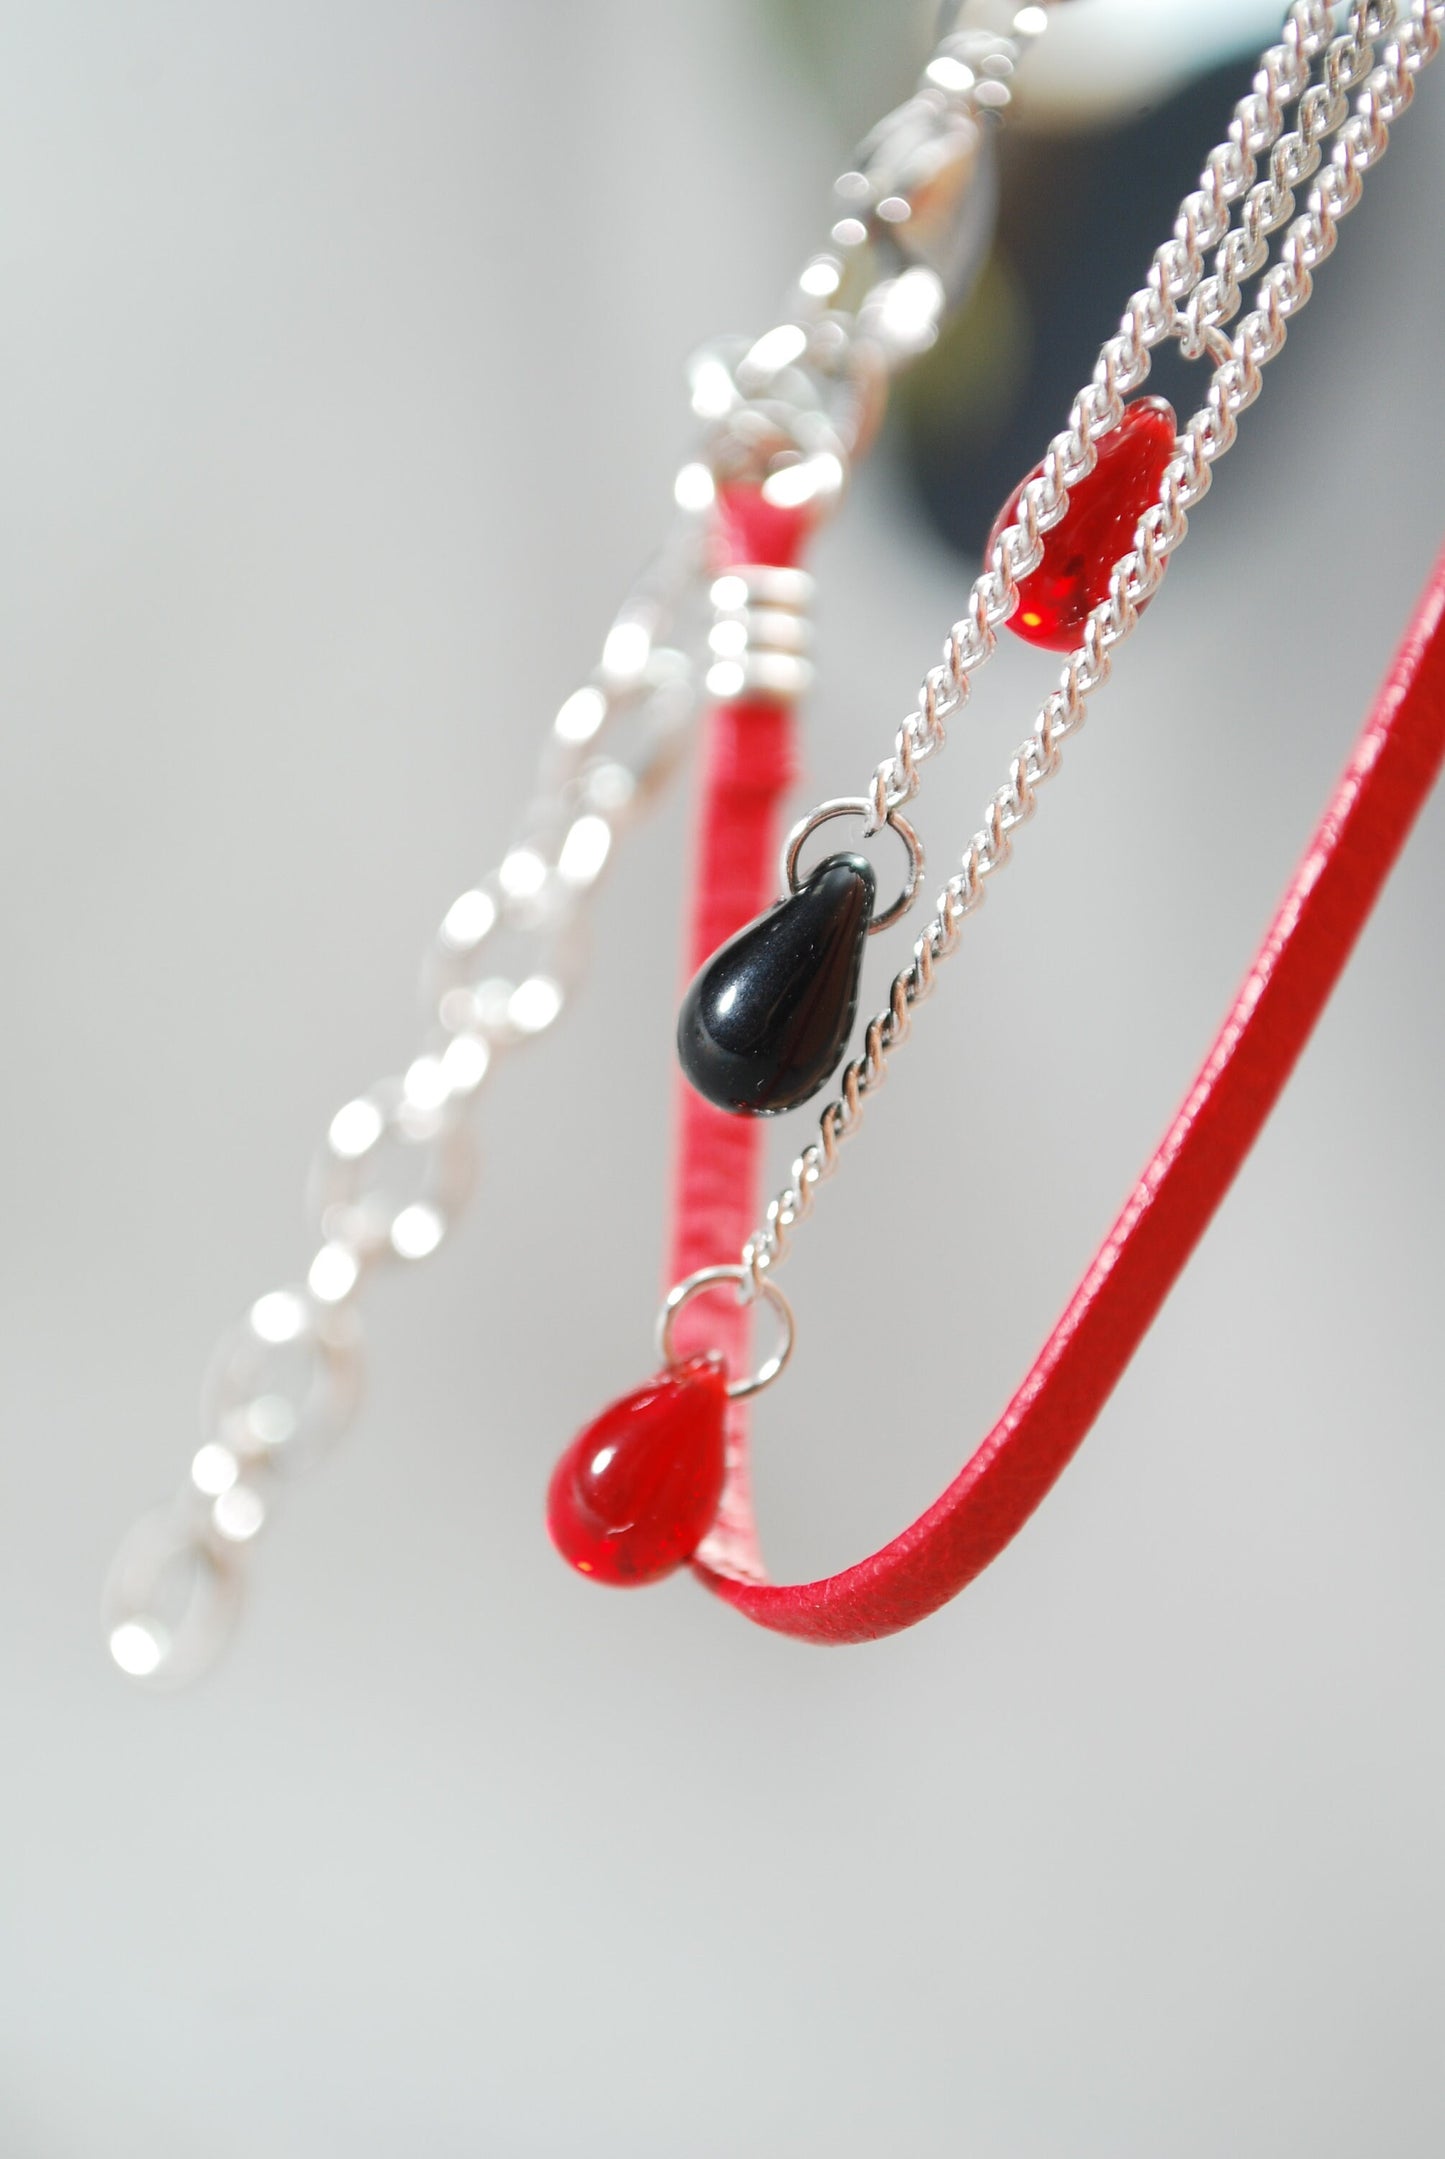 Bold Red Leather Choker with Stainless Steel Heart Pendant - Exclusively Designed by Estibela, Adjustible length.